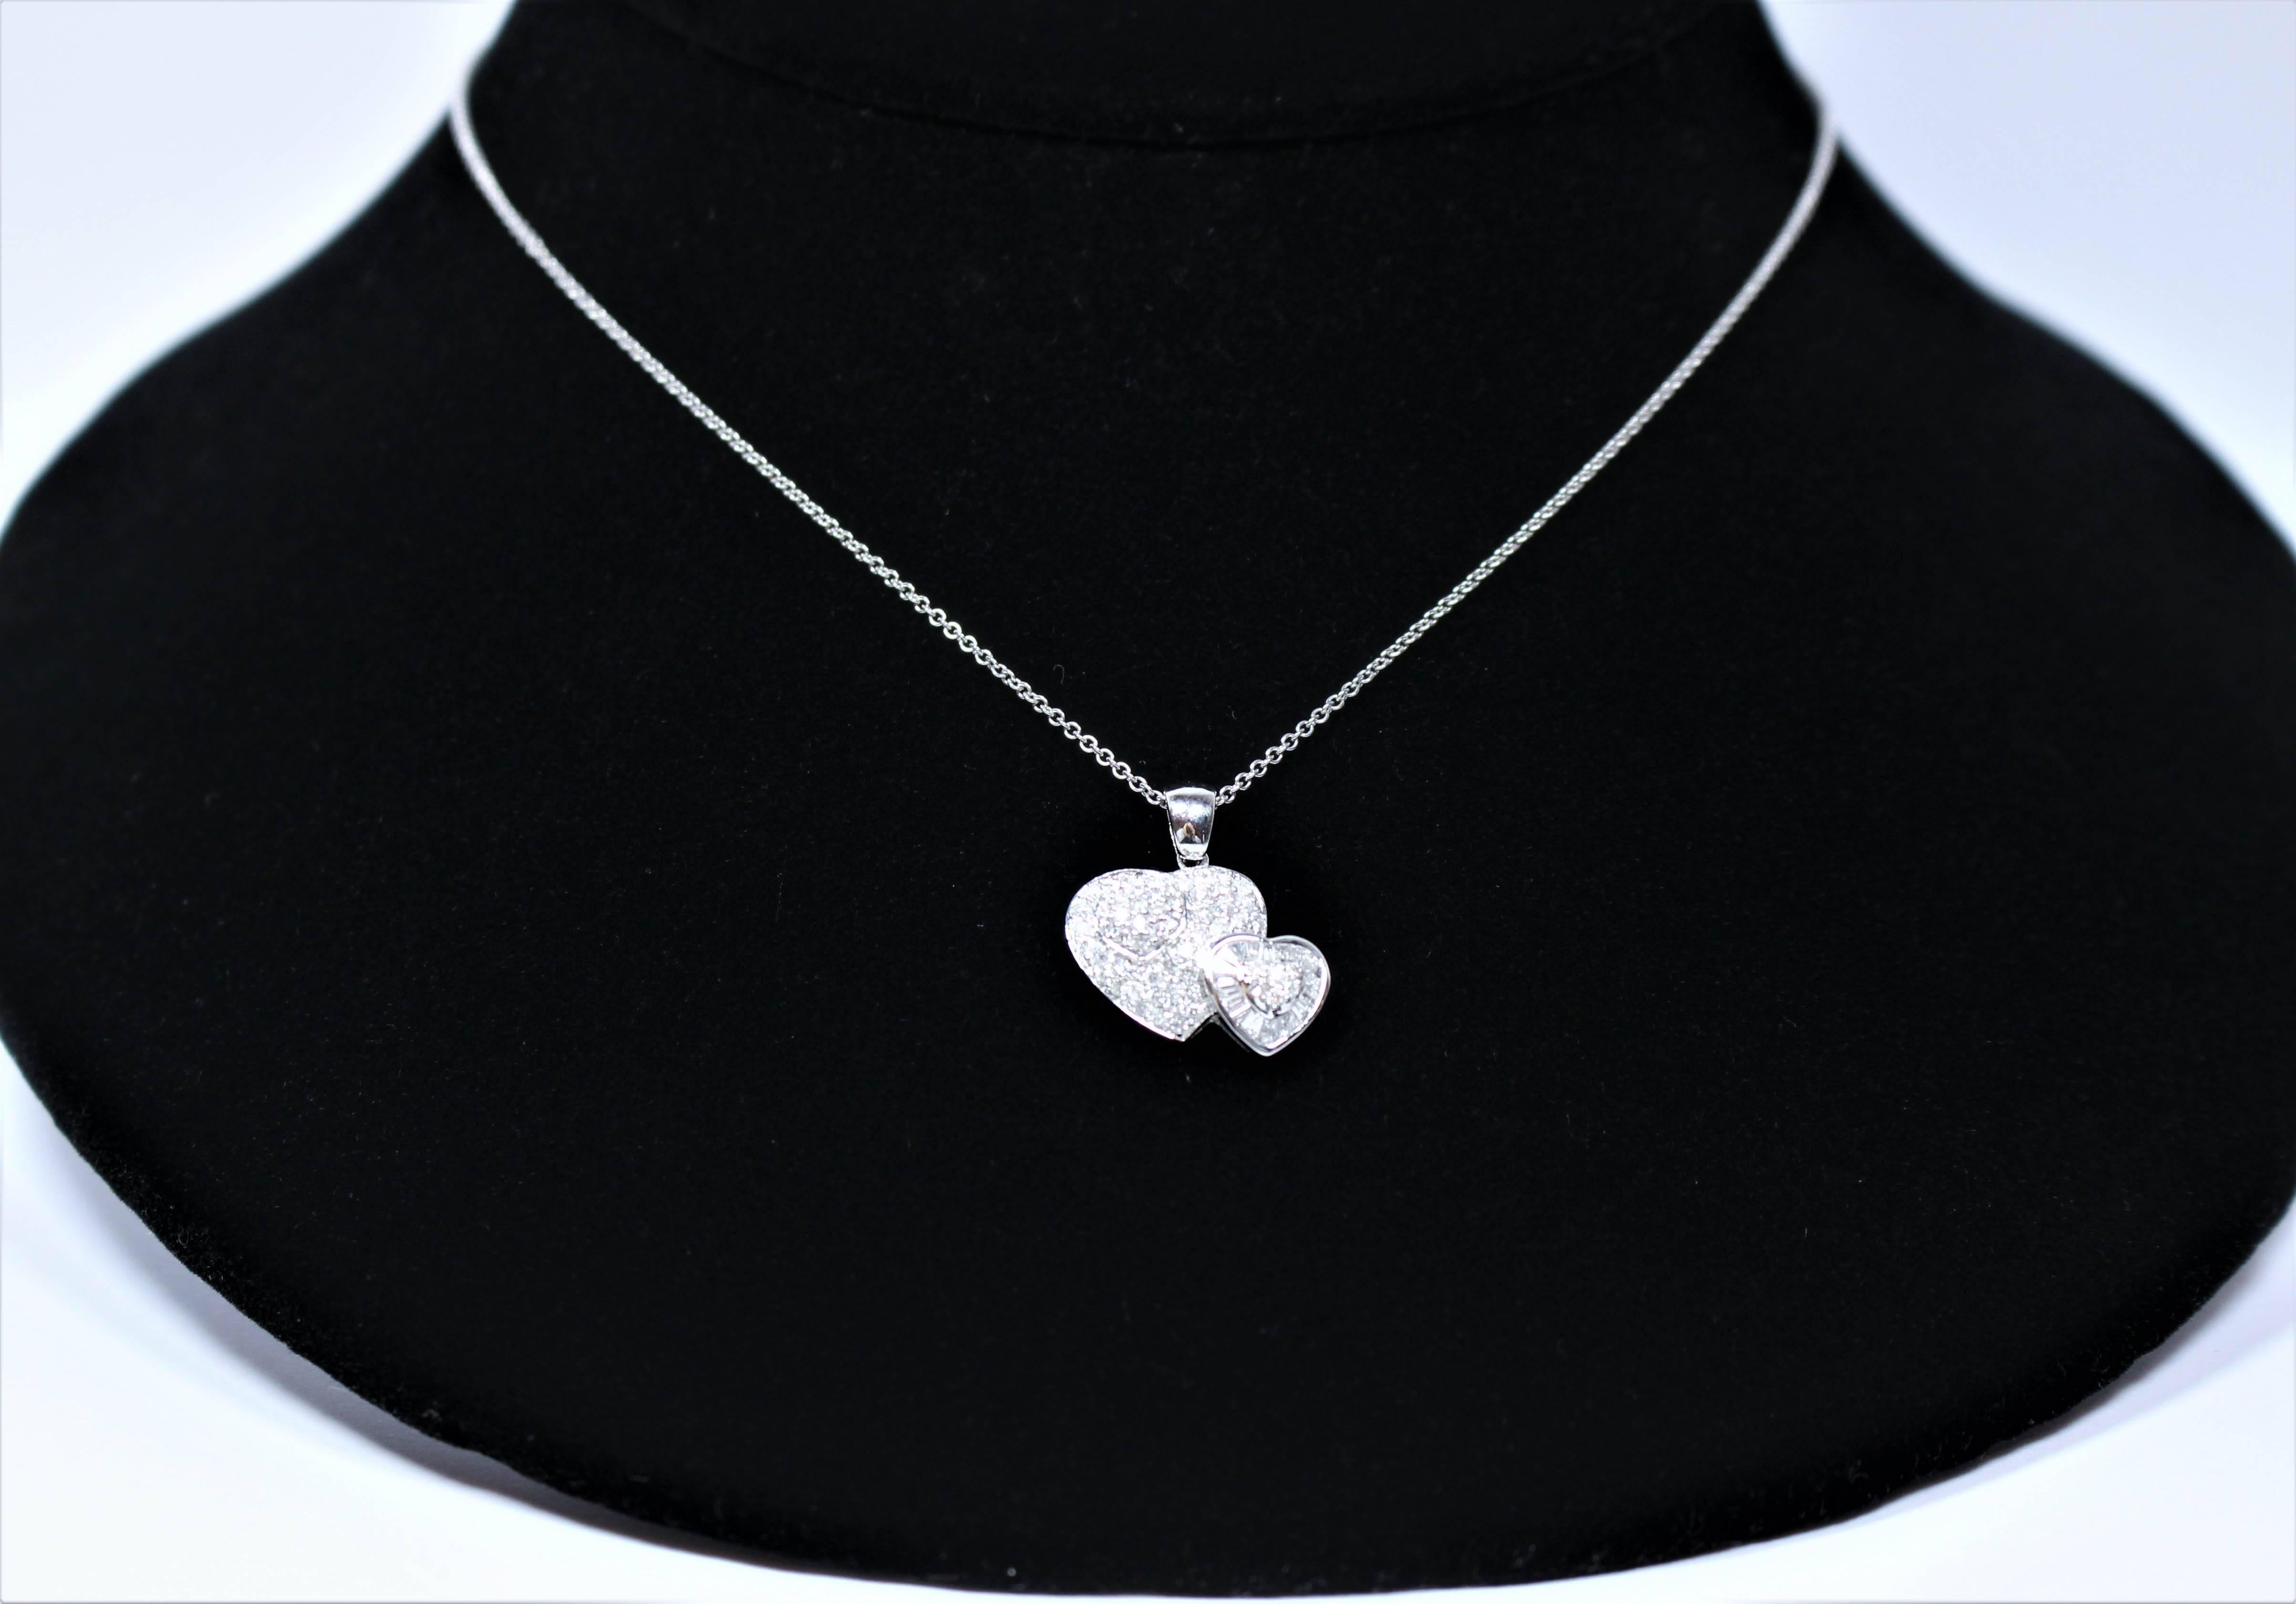 This necklace is composed of 18KT white gold and features a double heart pendant. A beautiful classic style. In excellent condition.

Please feel free to ask any questions you may have, we are happy to assist. 

Specs:
18 KT White